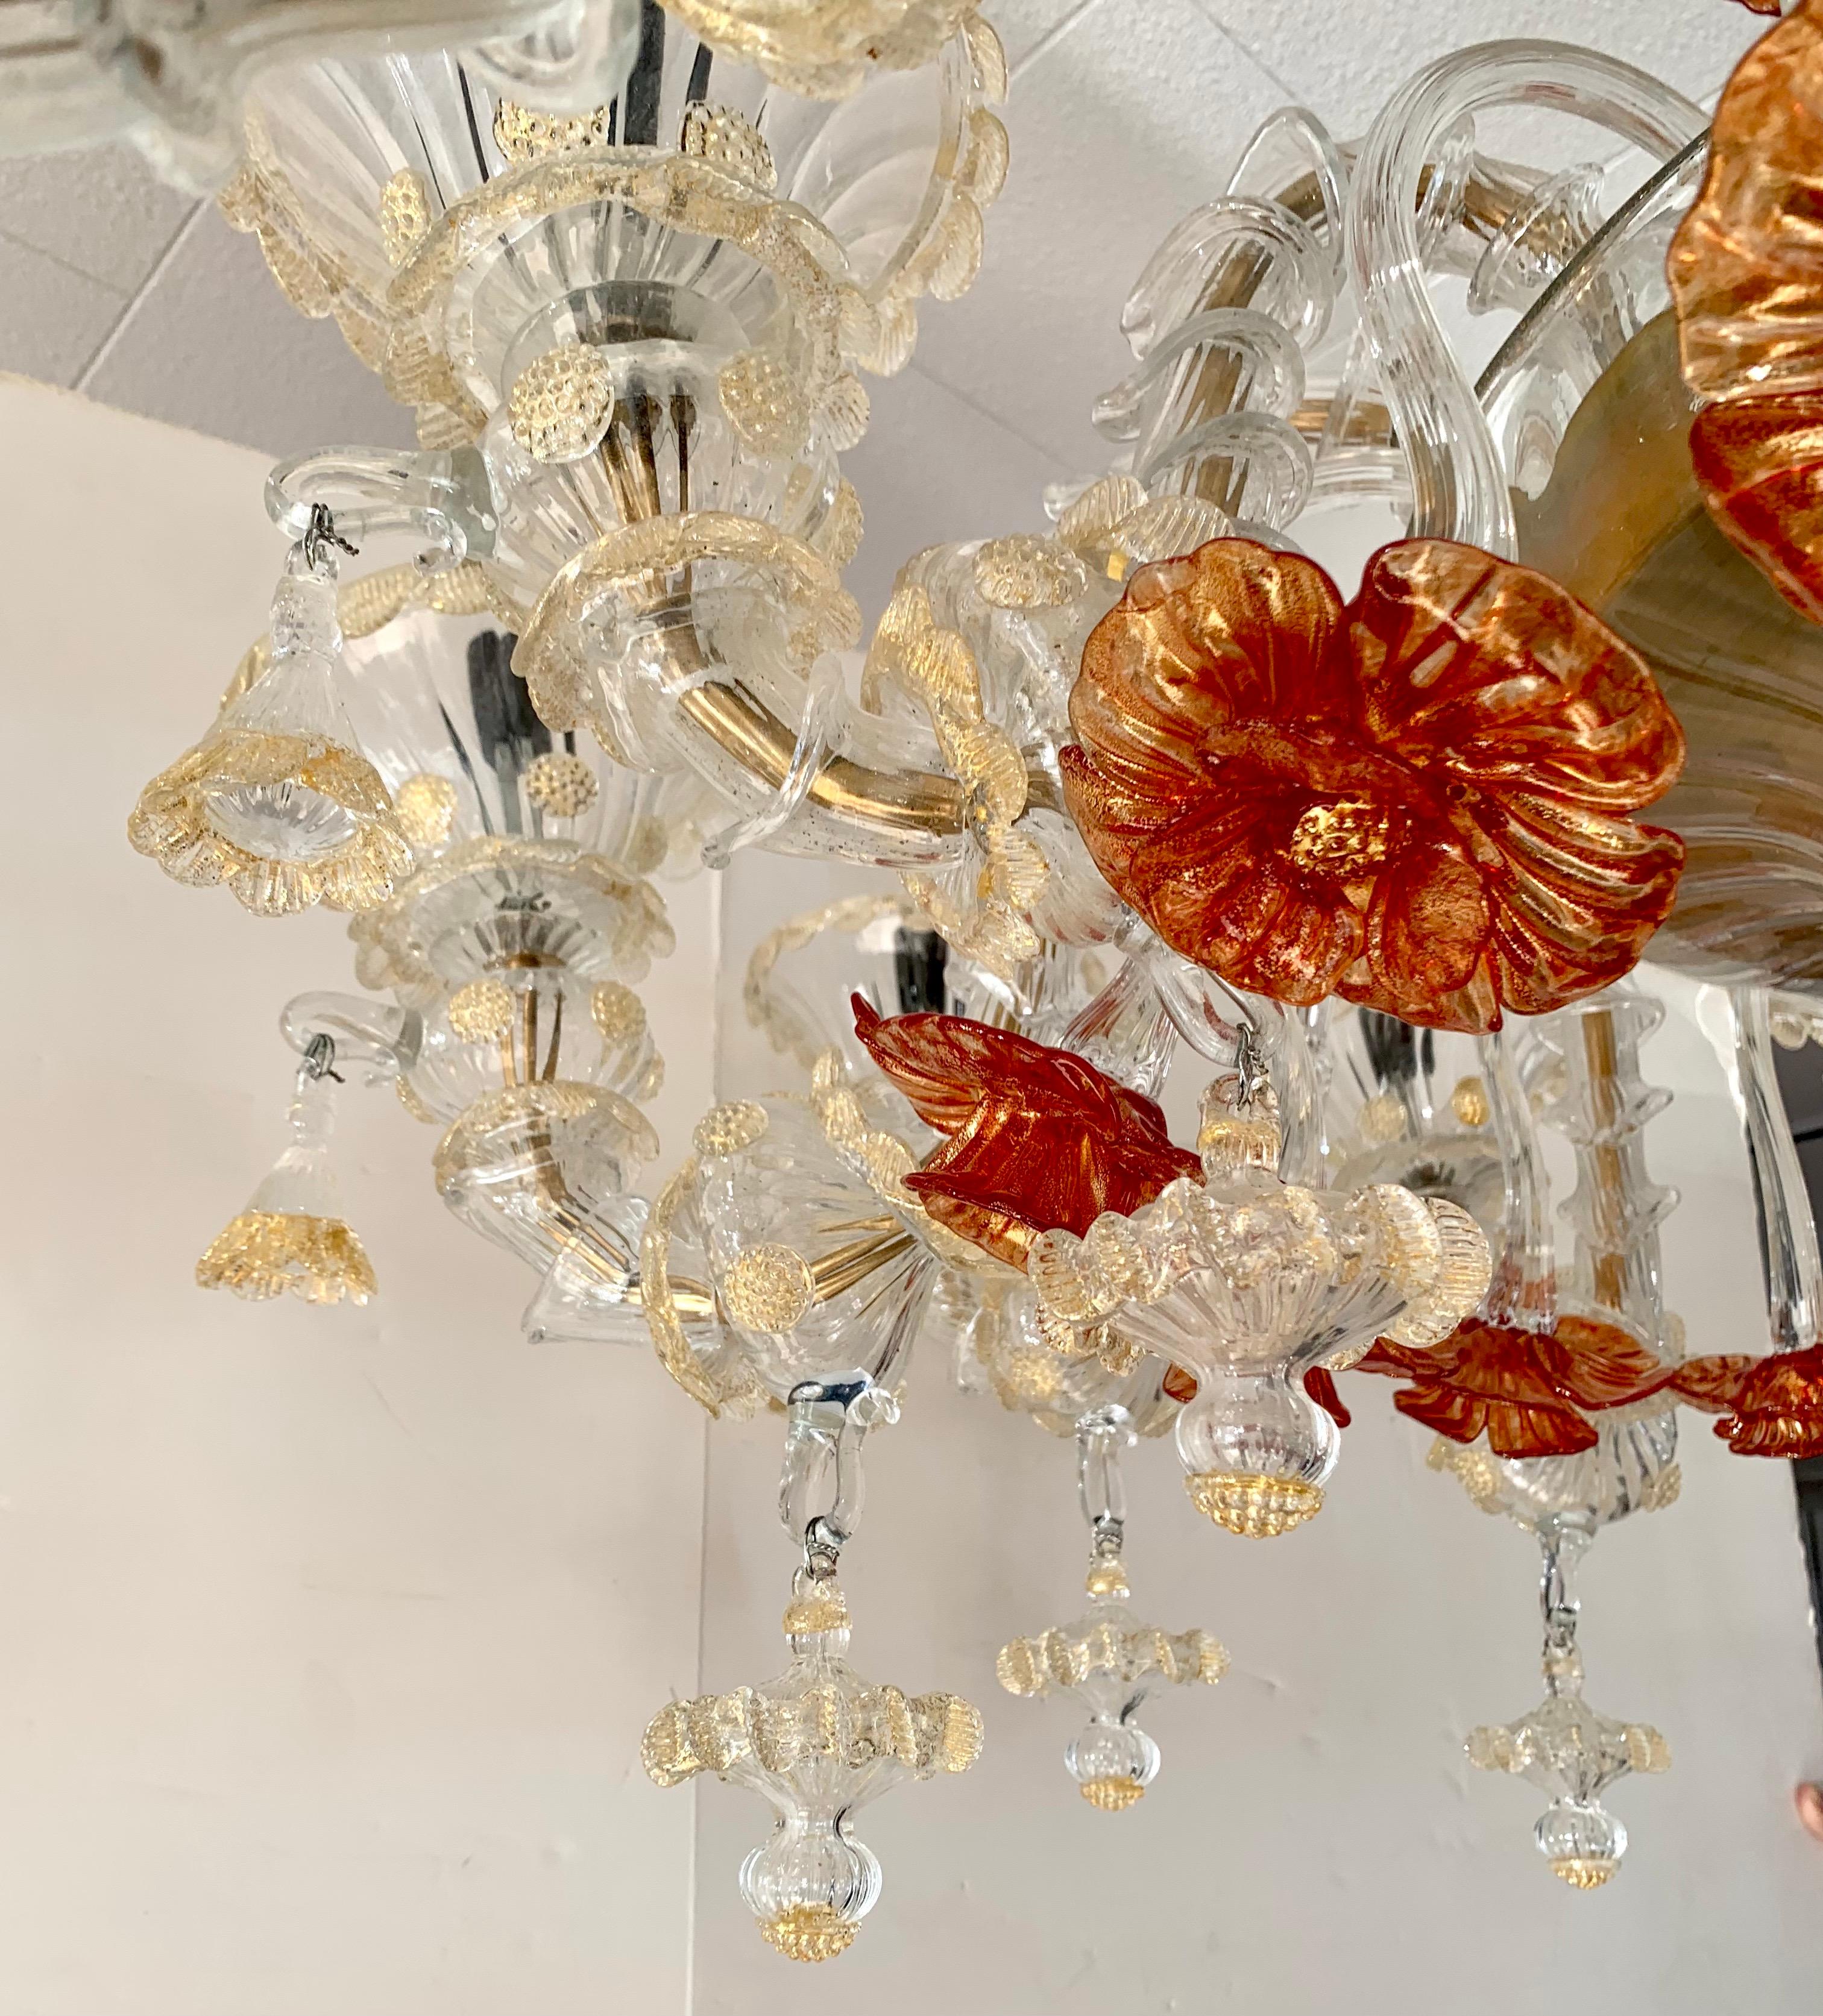 Murano Glass Exquisite Extra Large Murano Multi Color Glass Chandelier Made in Italy For Sale